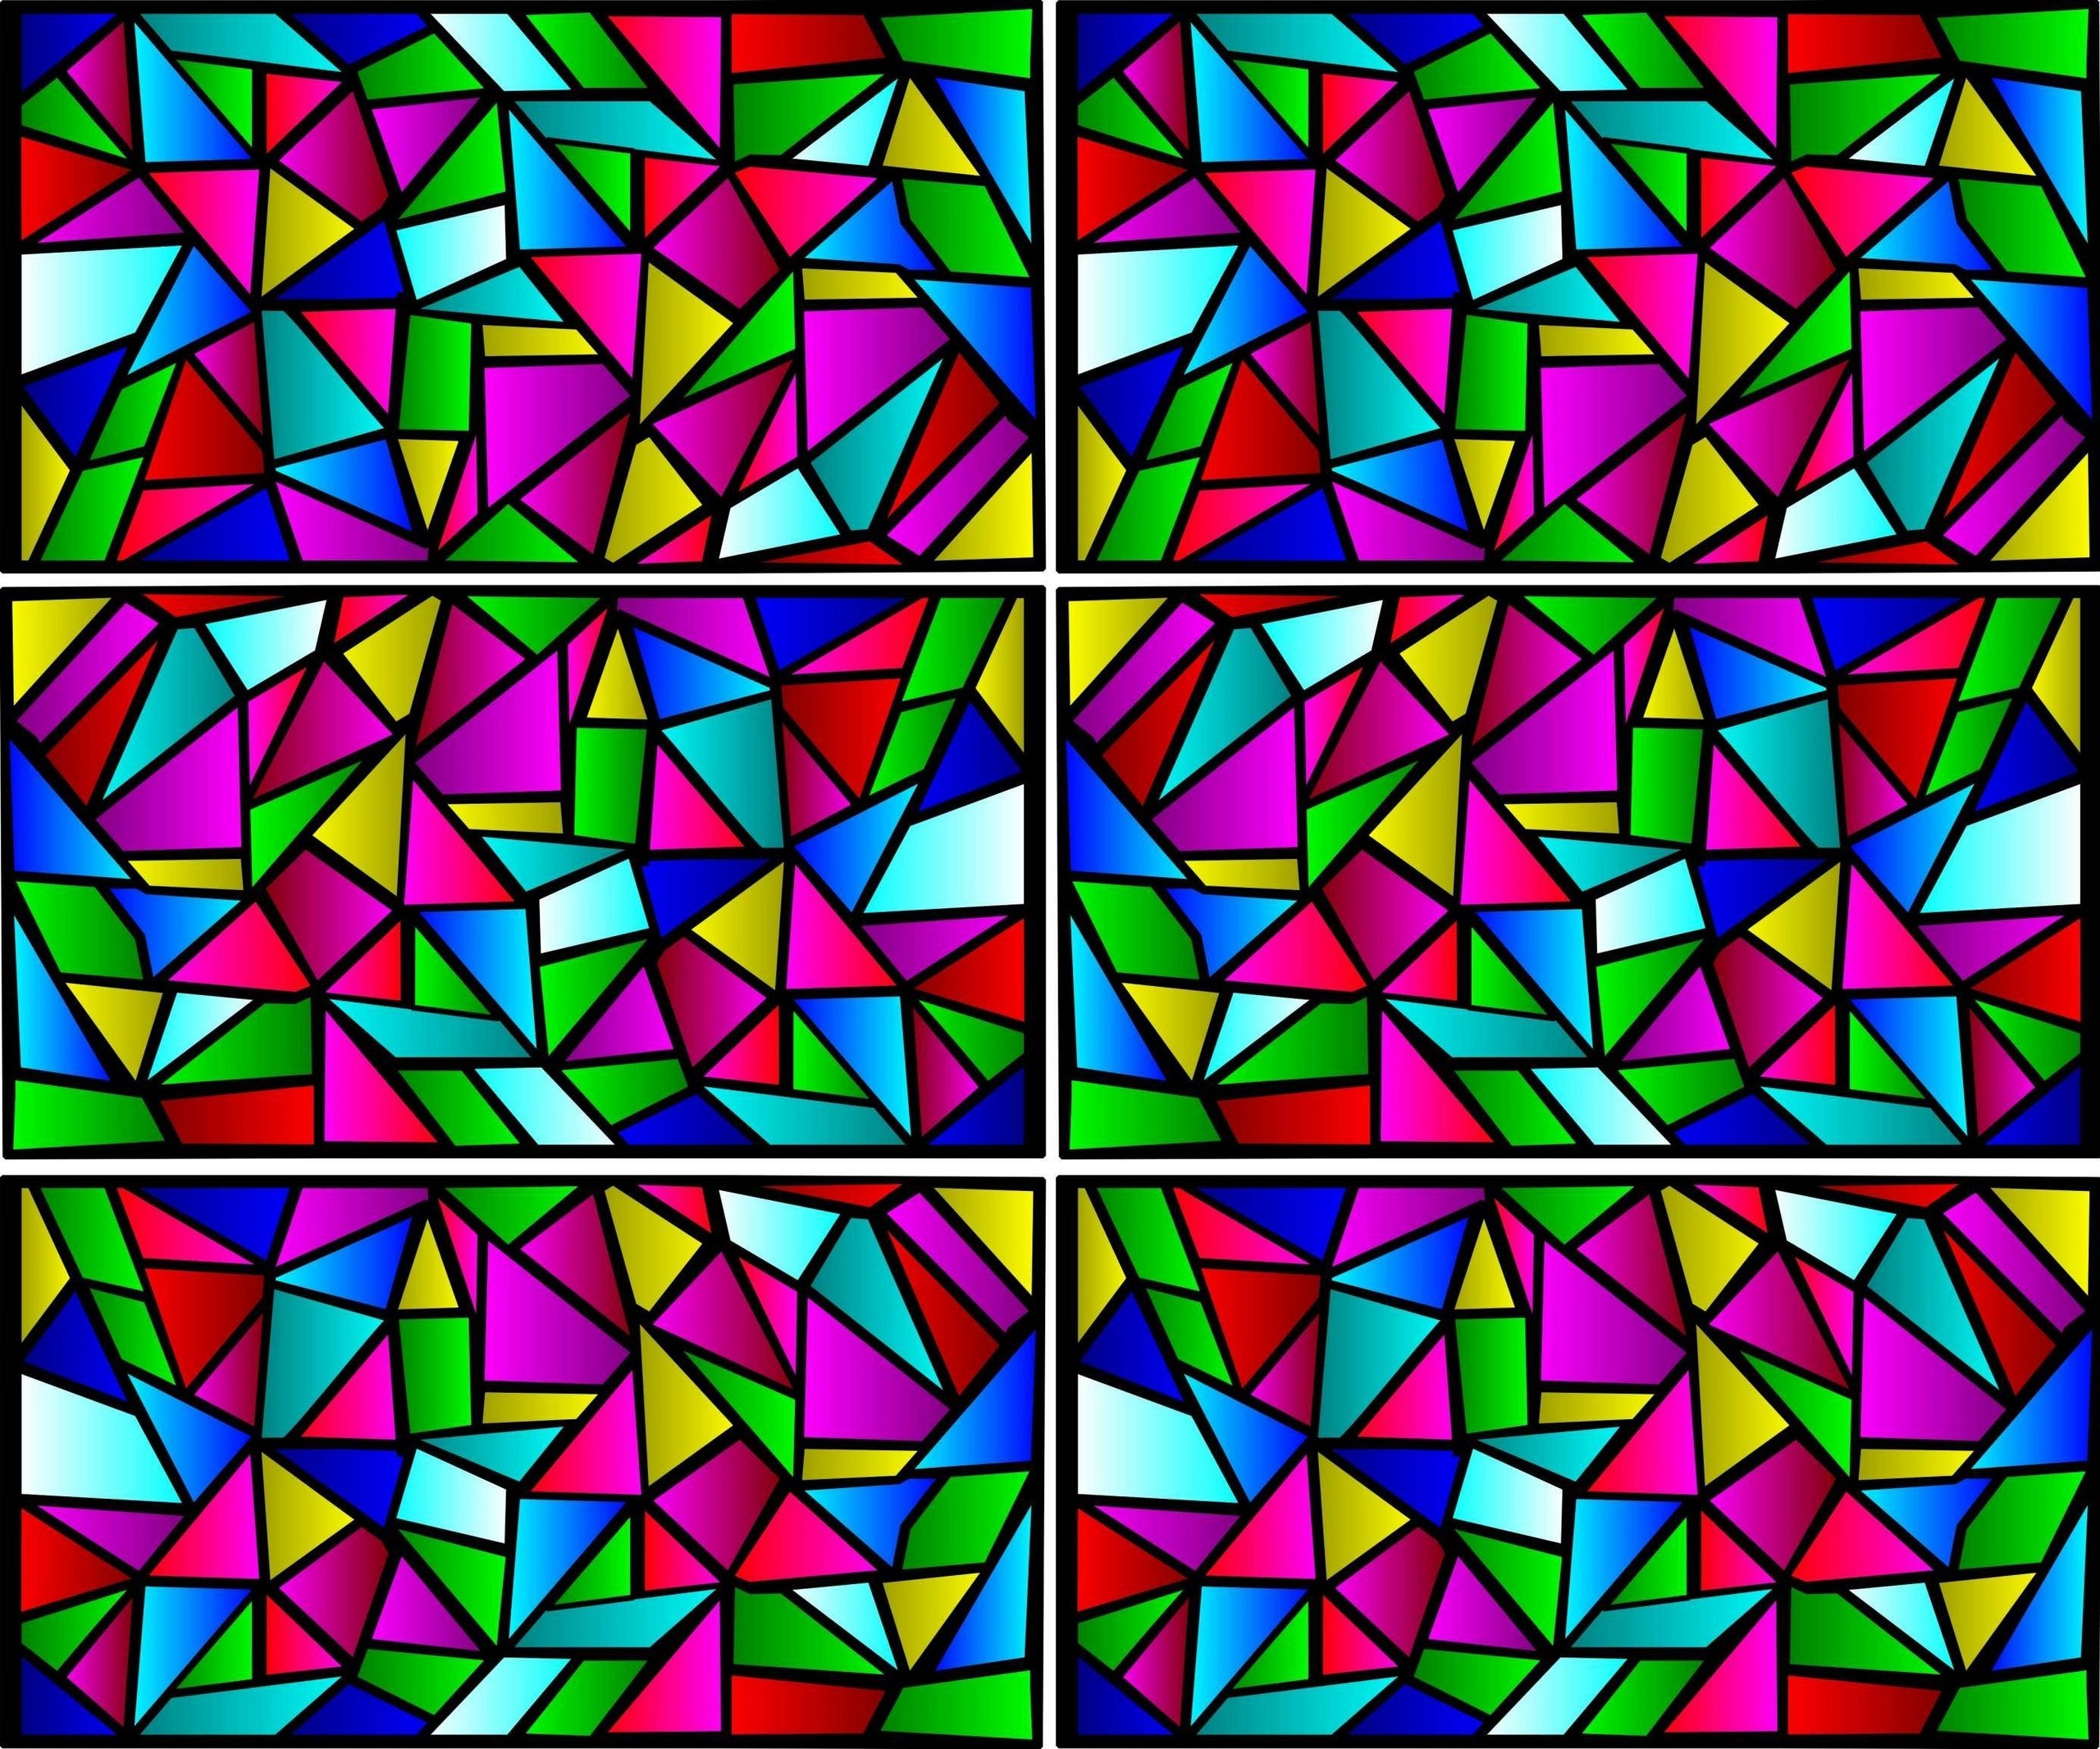 Stained Glass HD wallpapers, Desktop wallpaper - most viewed